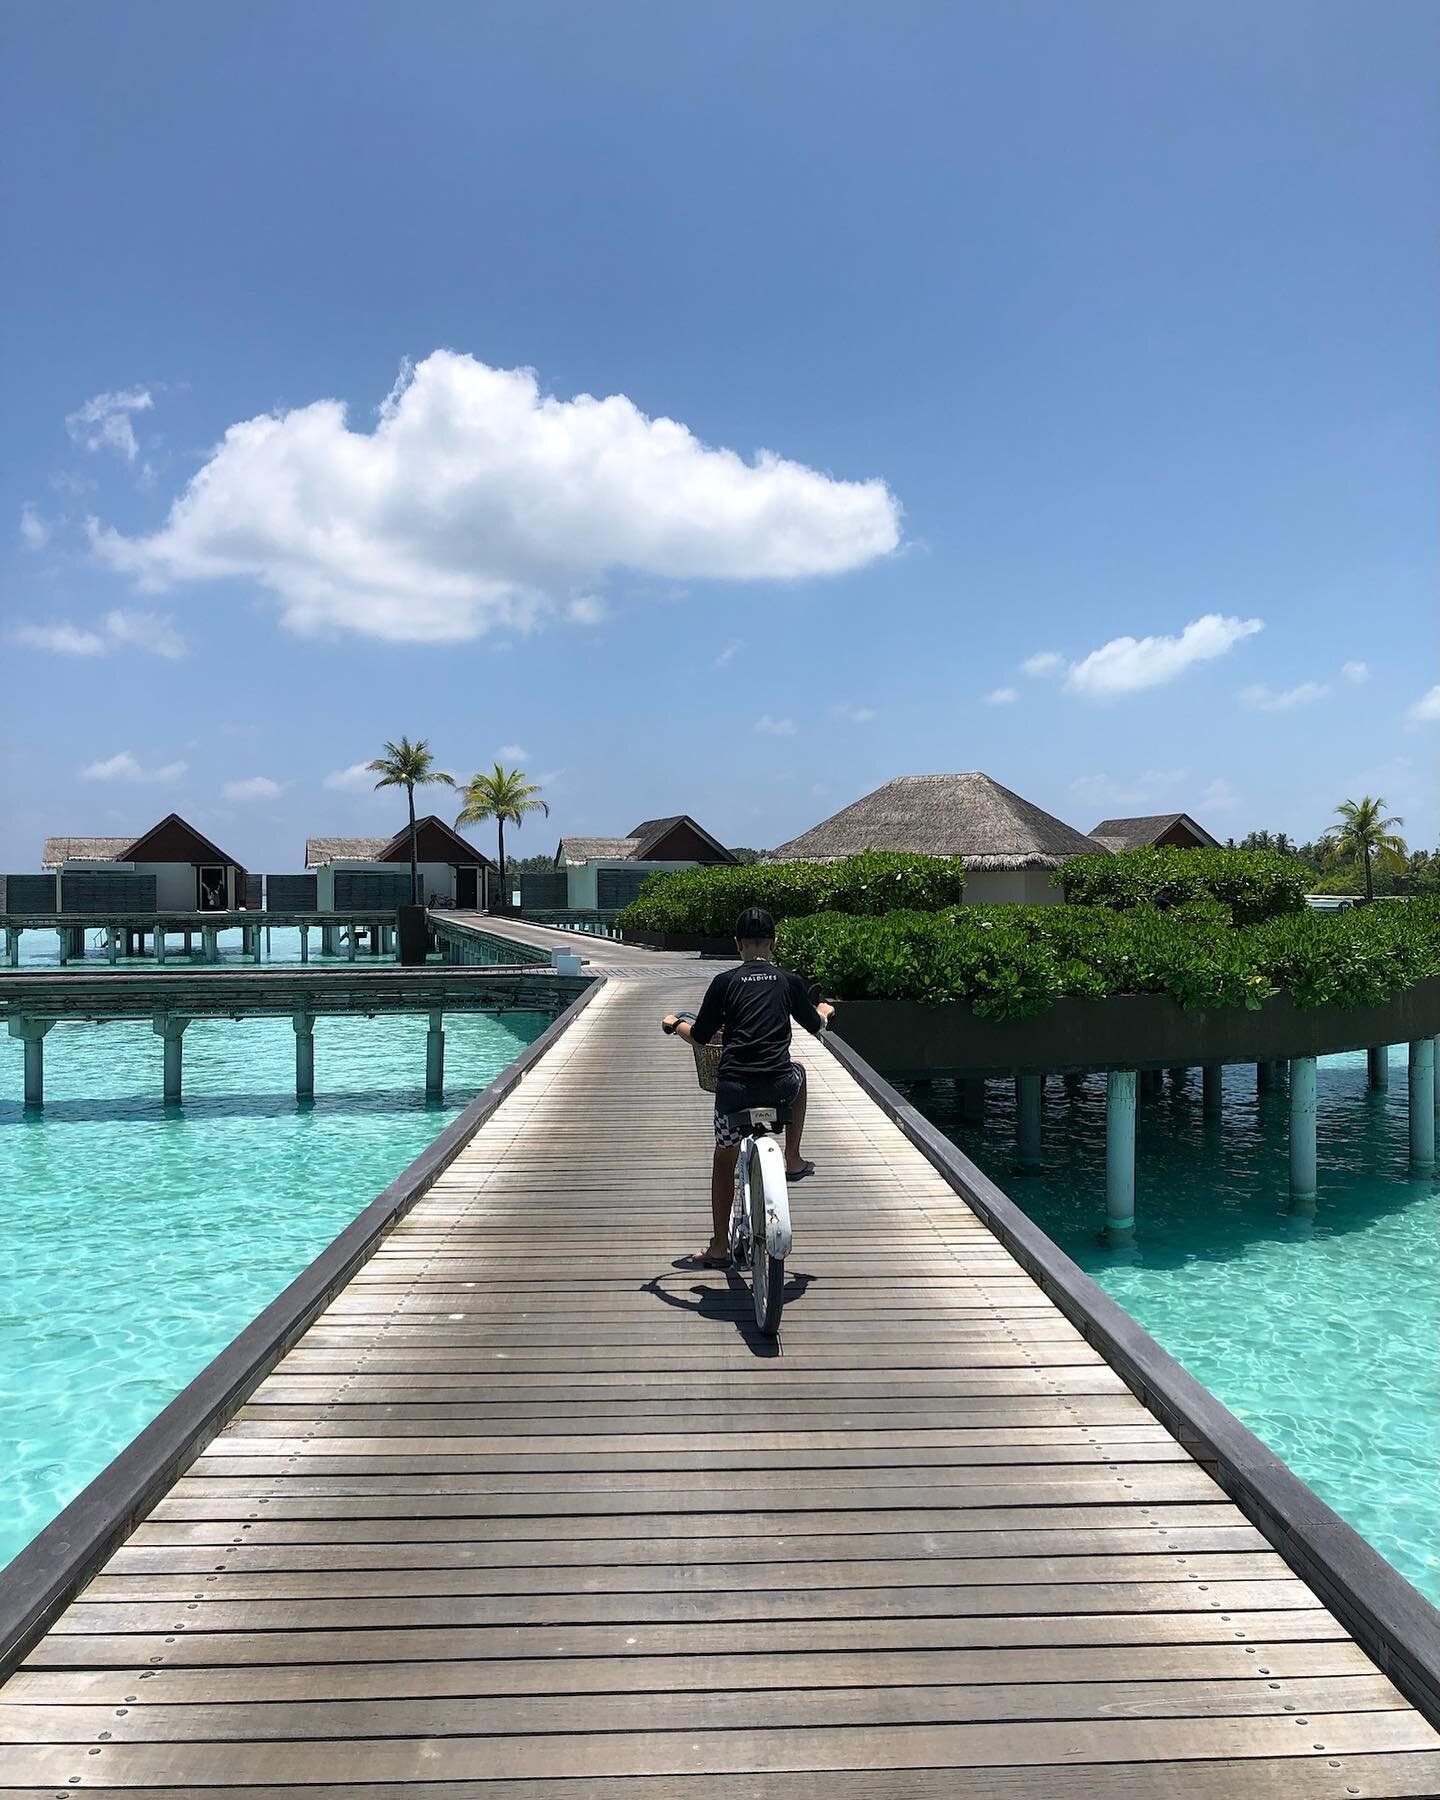 Ready to escape to your dream paradise in the Maldives? ✈️🌴

At @niyamamaldives , a truly dreamy experience awaits you, ready to transport you to another world. 

Chat to our team about bringing your dream holiday to life today like they did for our